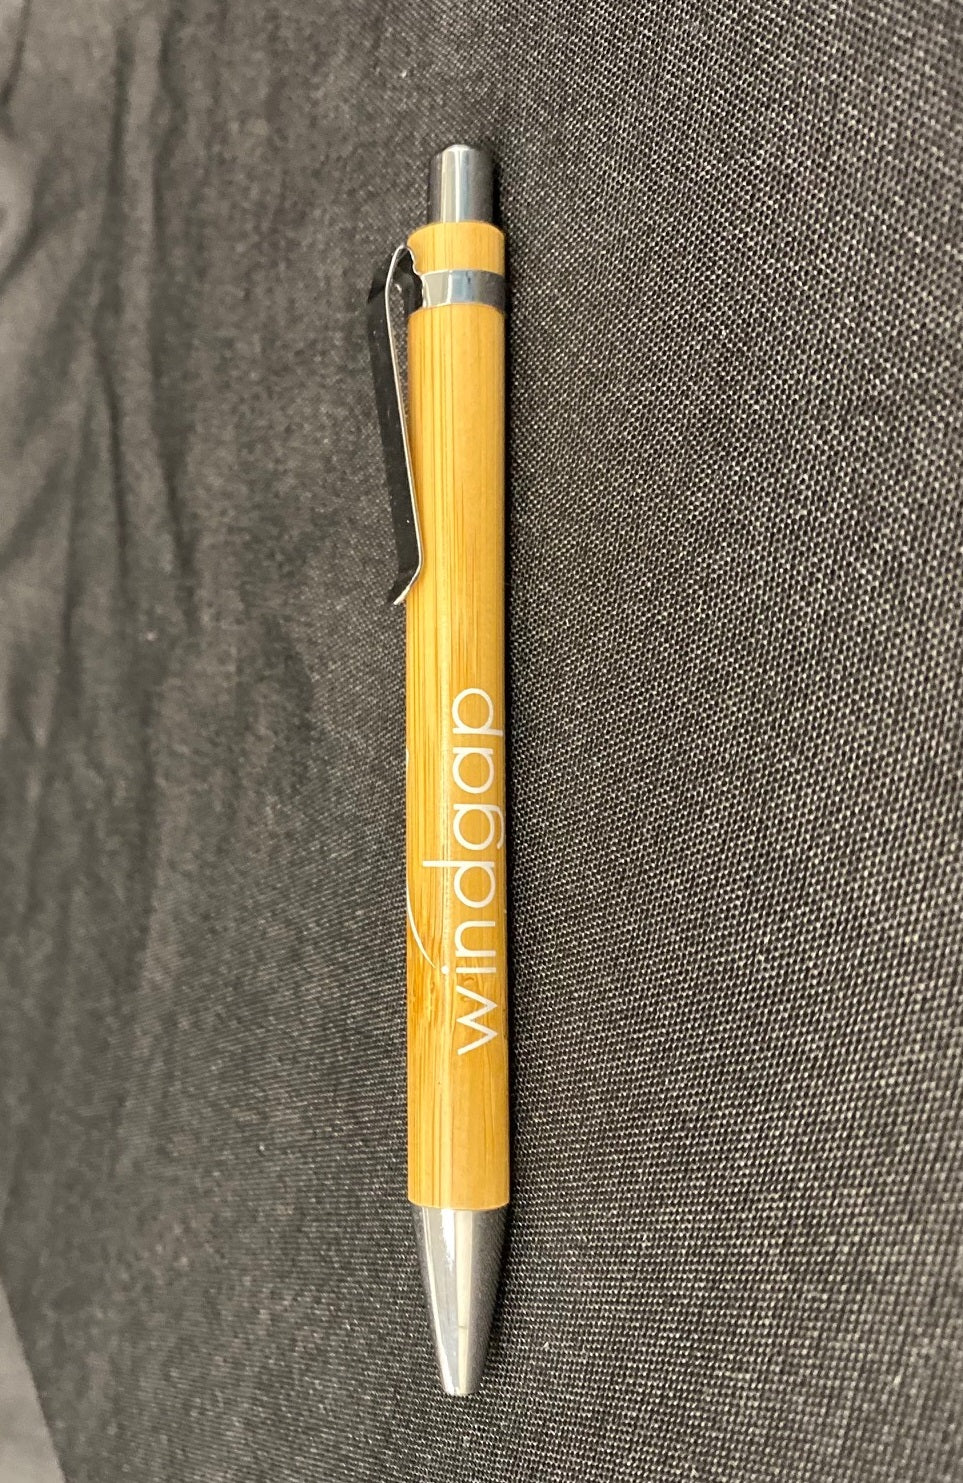 WINDGAP PEN - 50% off applied at checkout